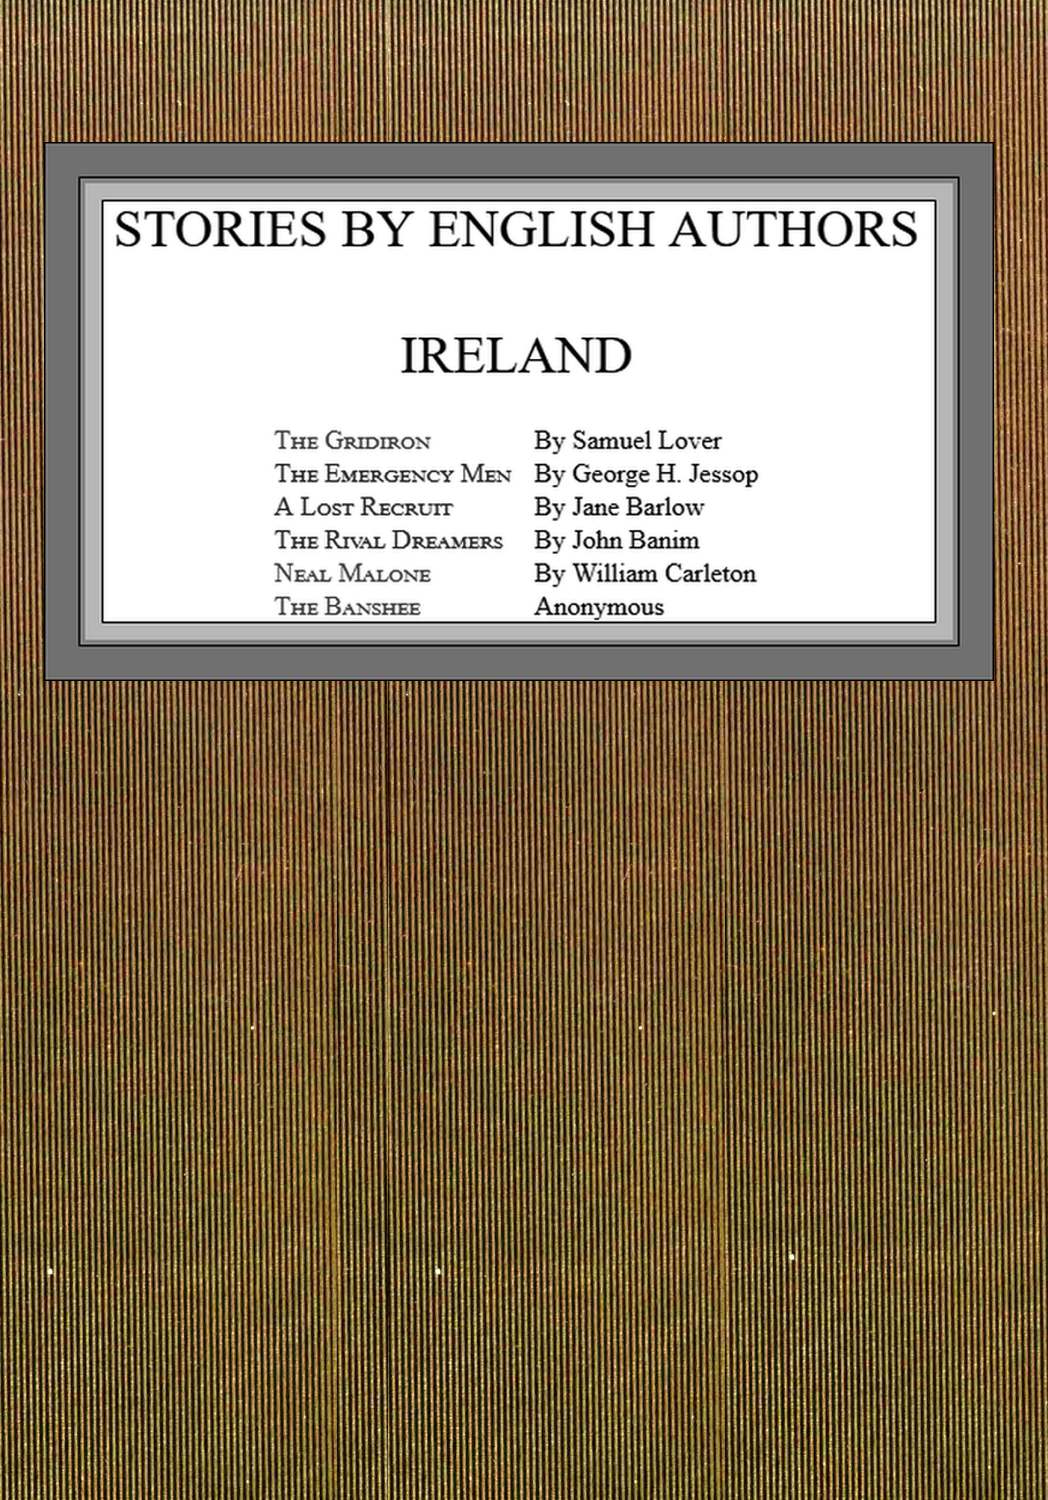 Stories by English Authors: Ireland